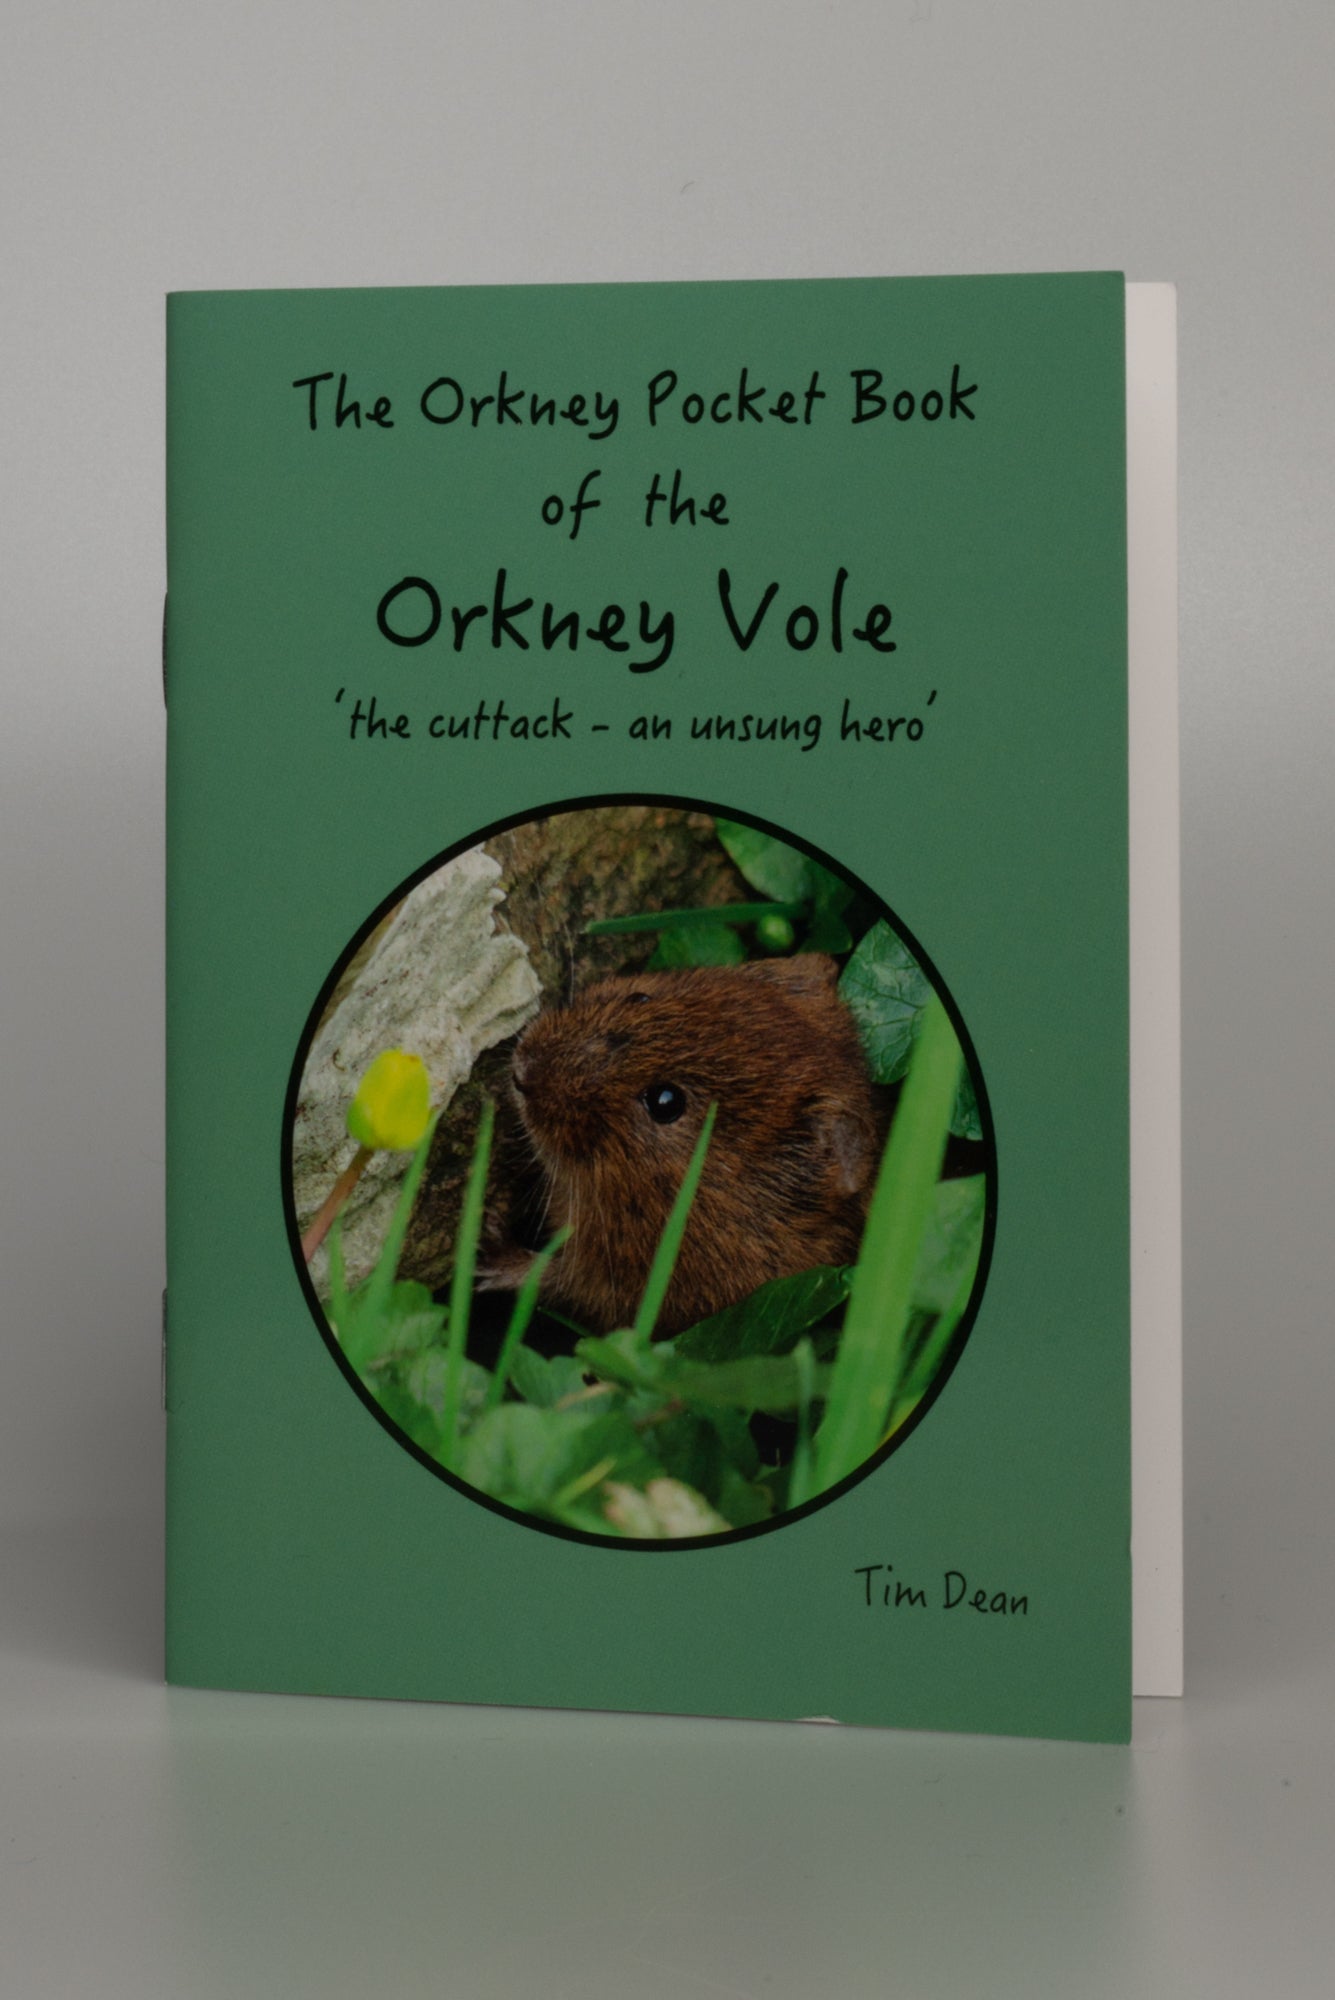 The Orkney Pocket Book series